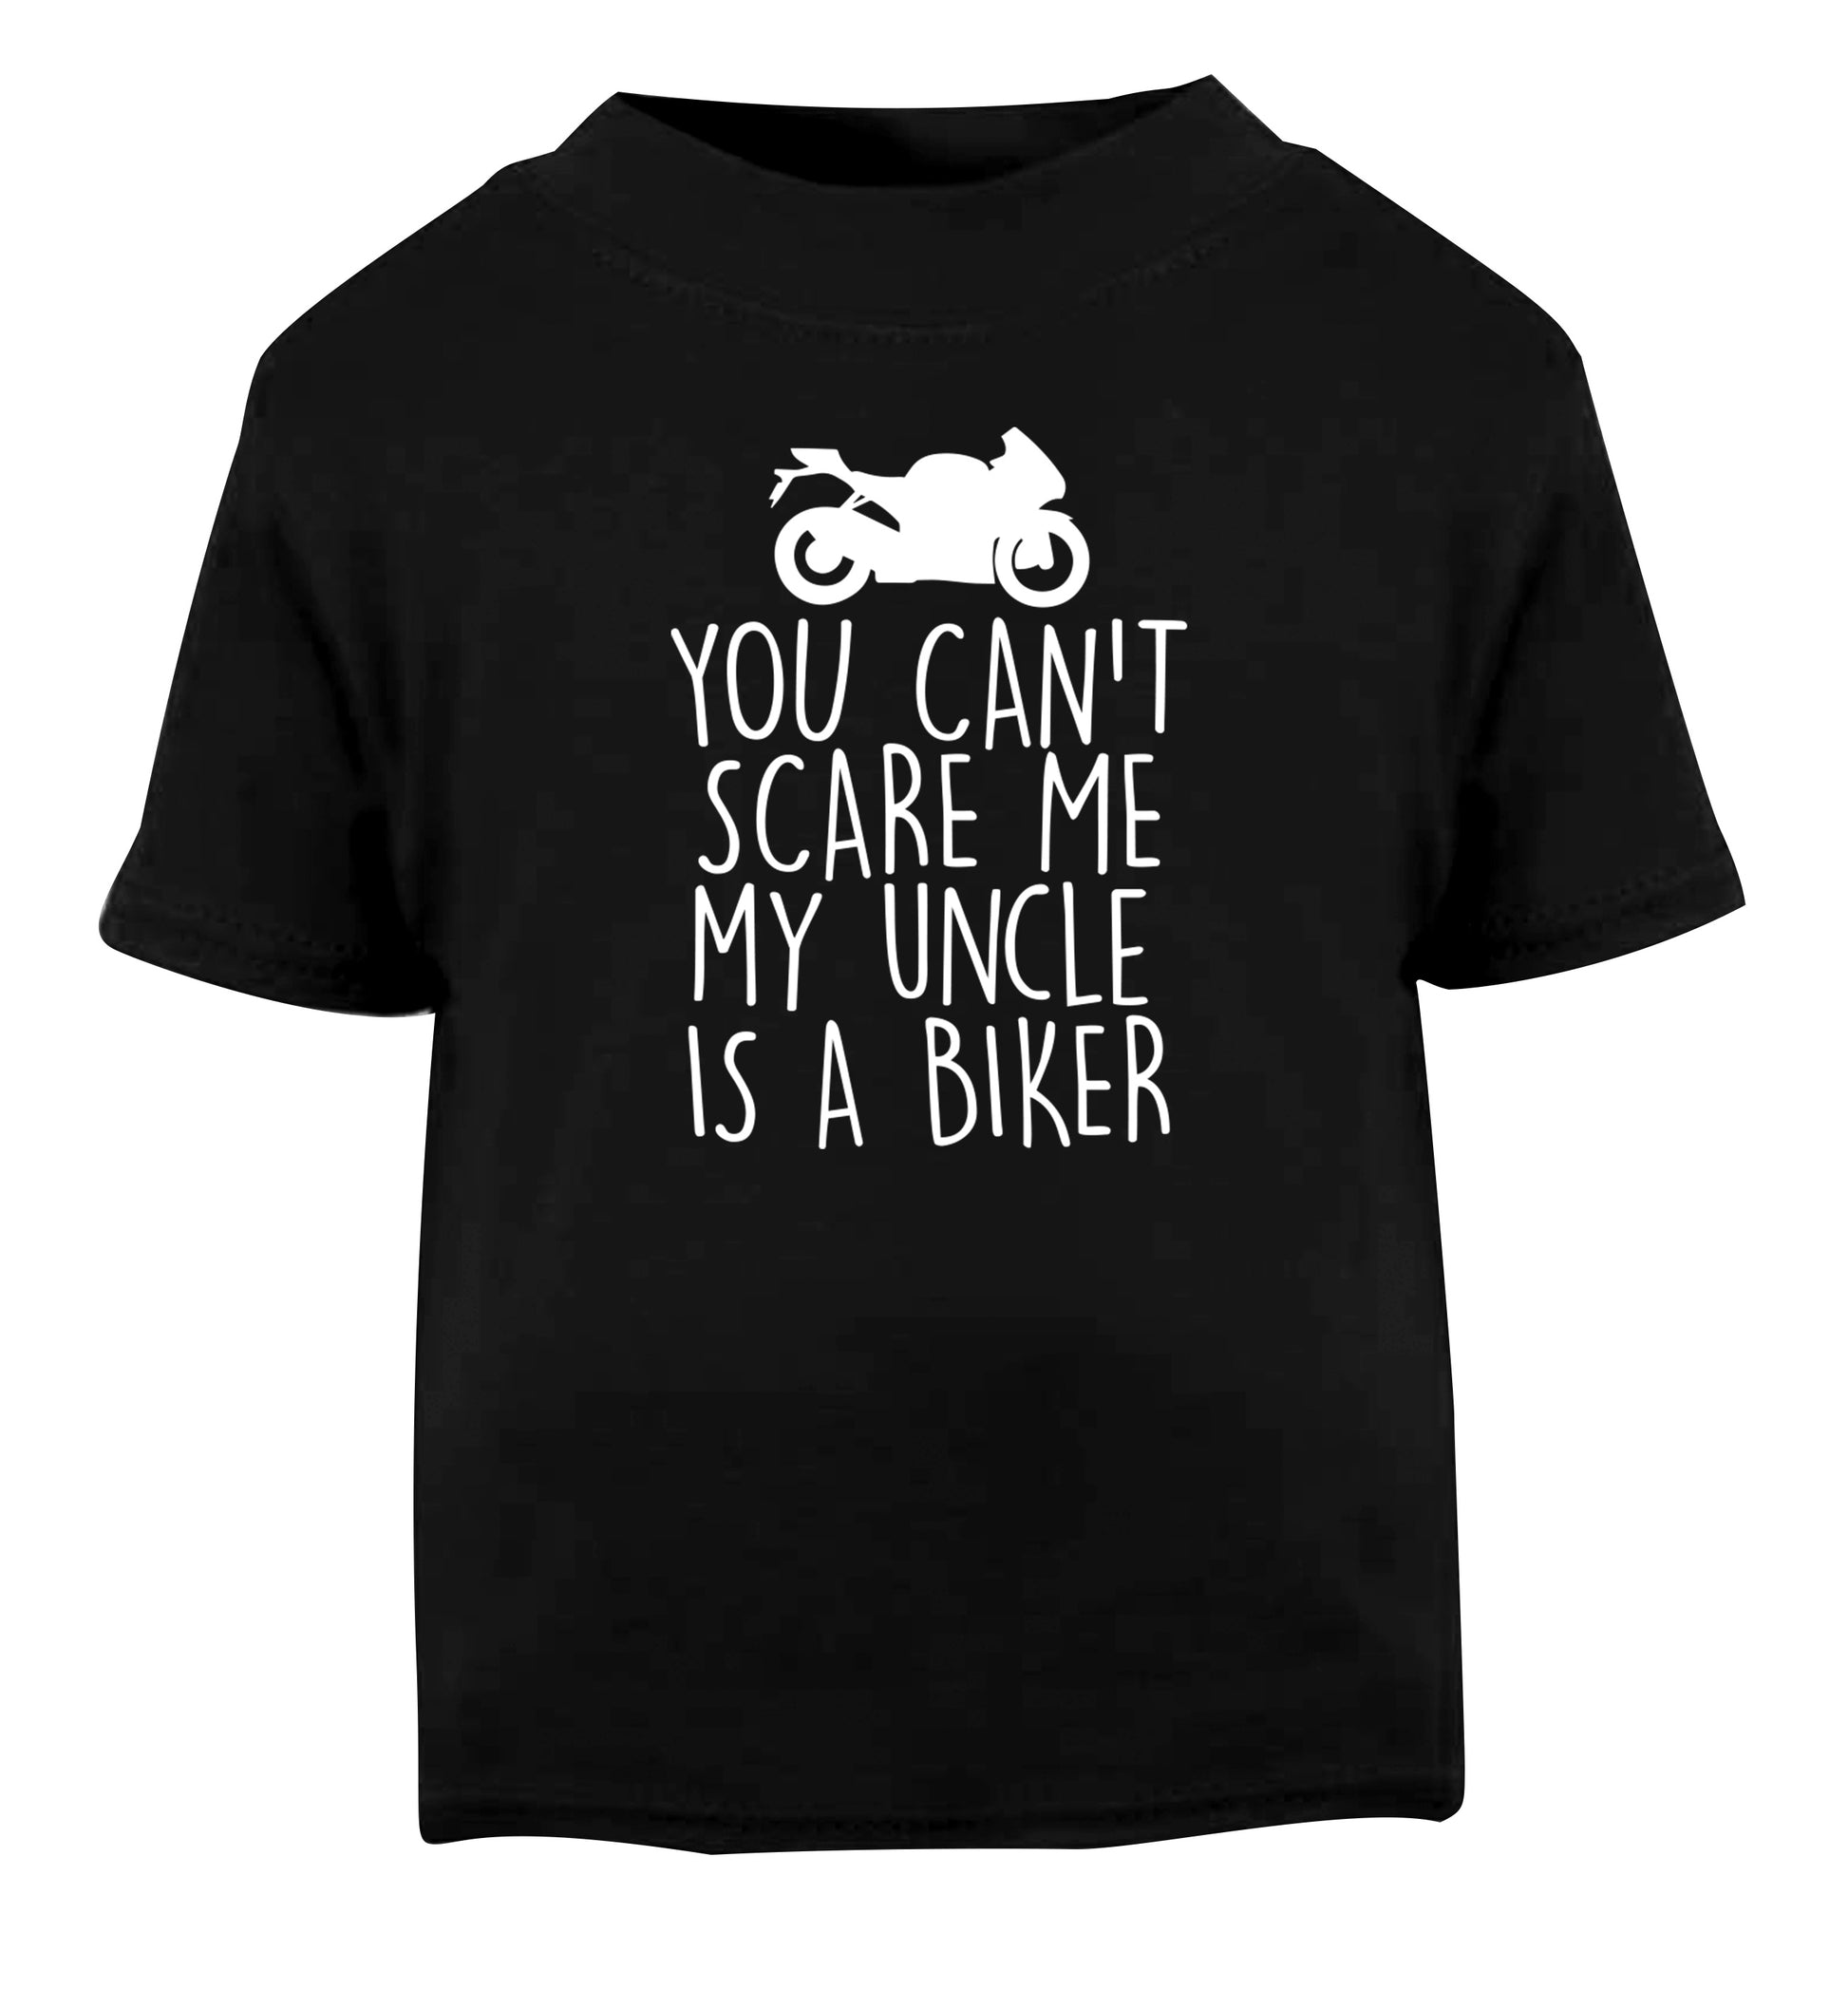 You can't scare me my uncle is a biker Black Baby Toddler Tshirt 2 years